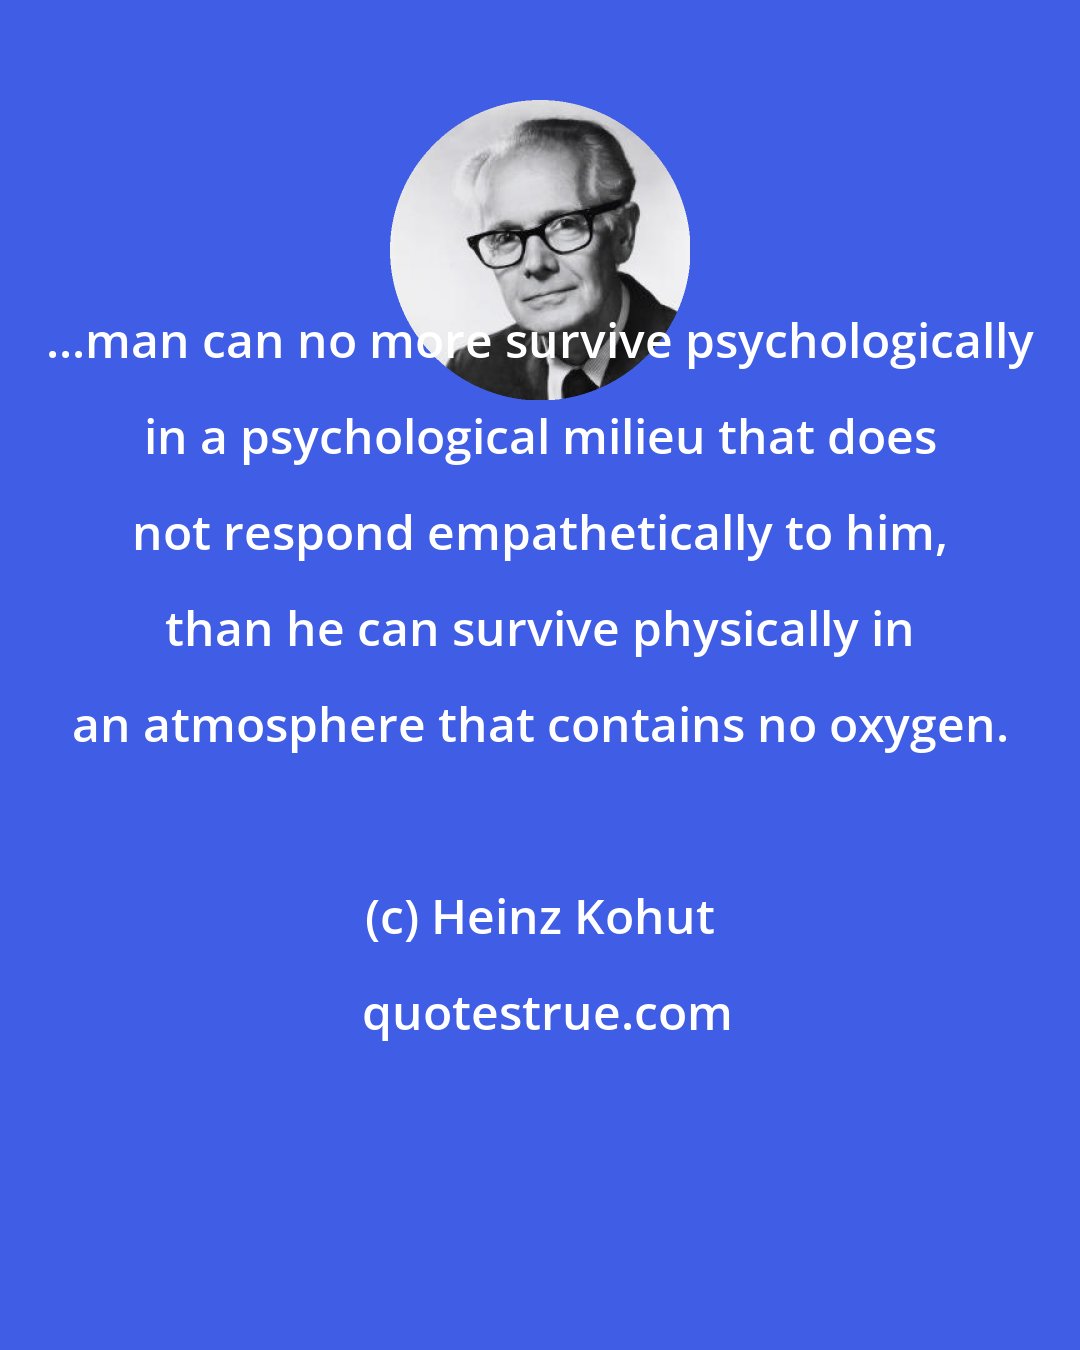 Heinz Kohut: ...man can no more survive psychologically in a psychological milieu that does not respond empathetically to him, than he can survive physically in an atmosphere that contains no oxygen.